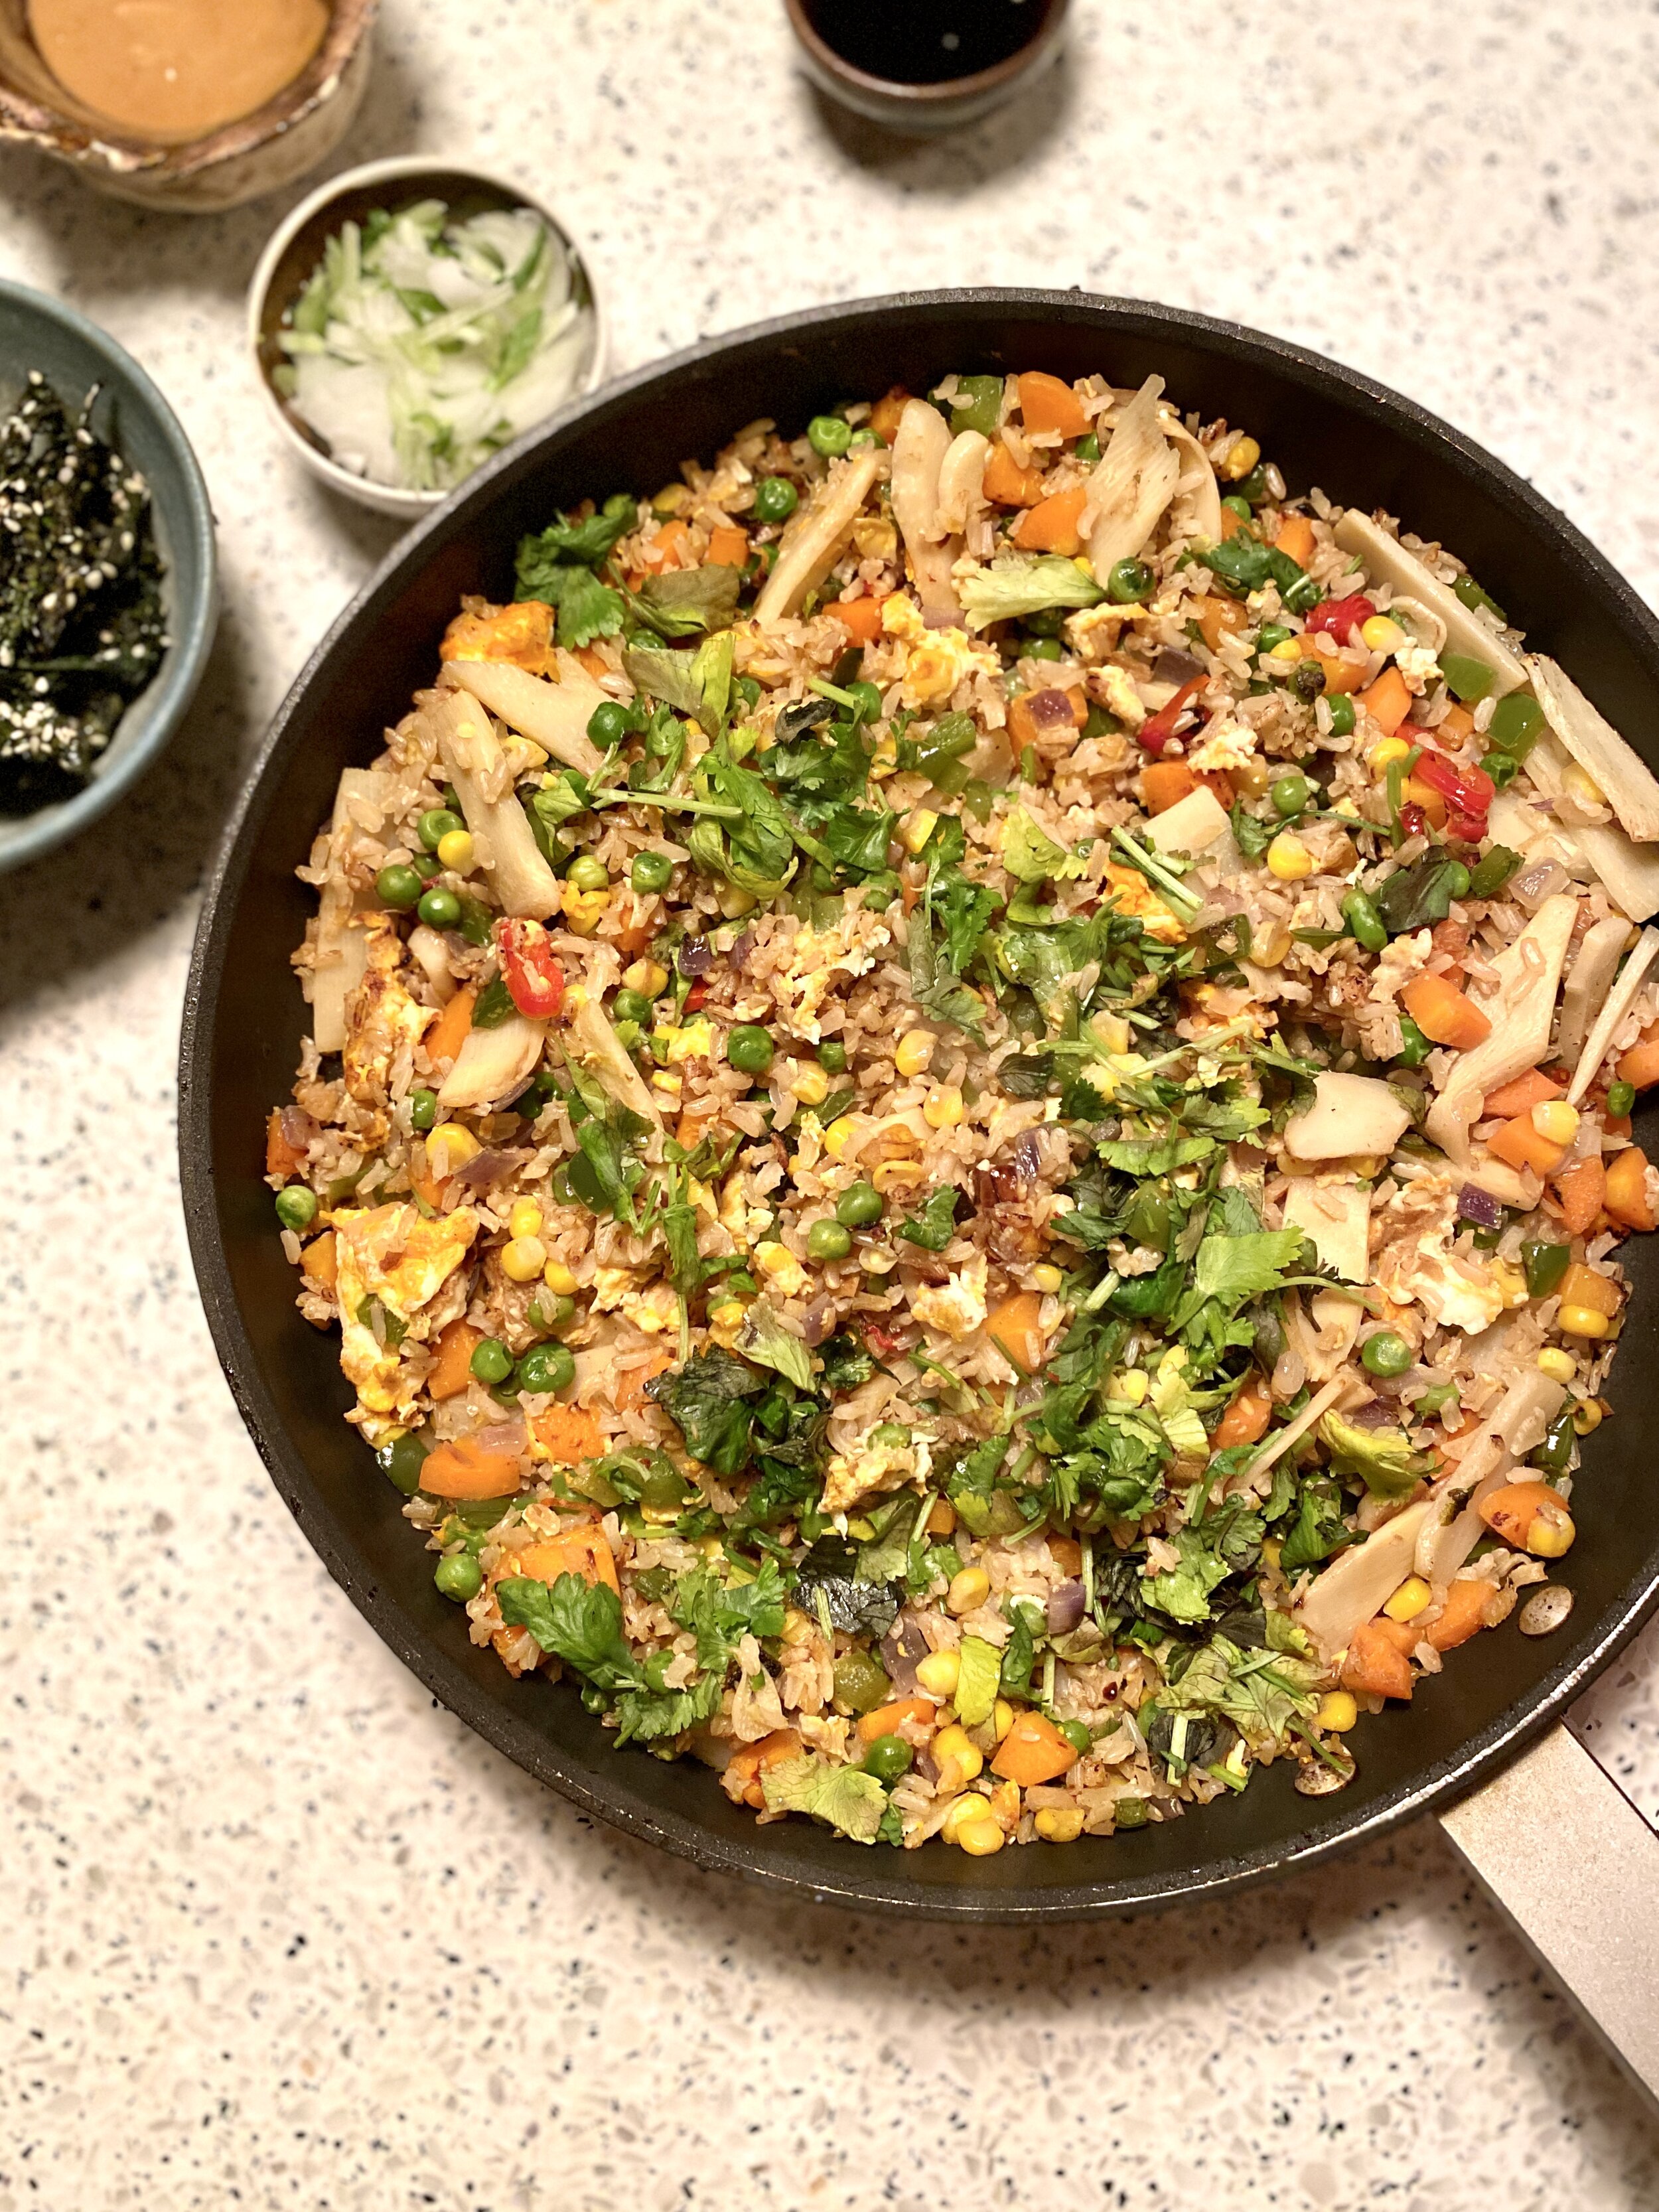 A flat-lay image of a large saucepan full of egg-fried rice